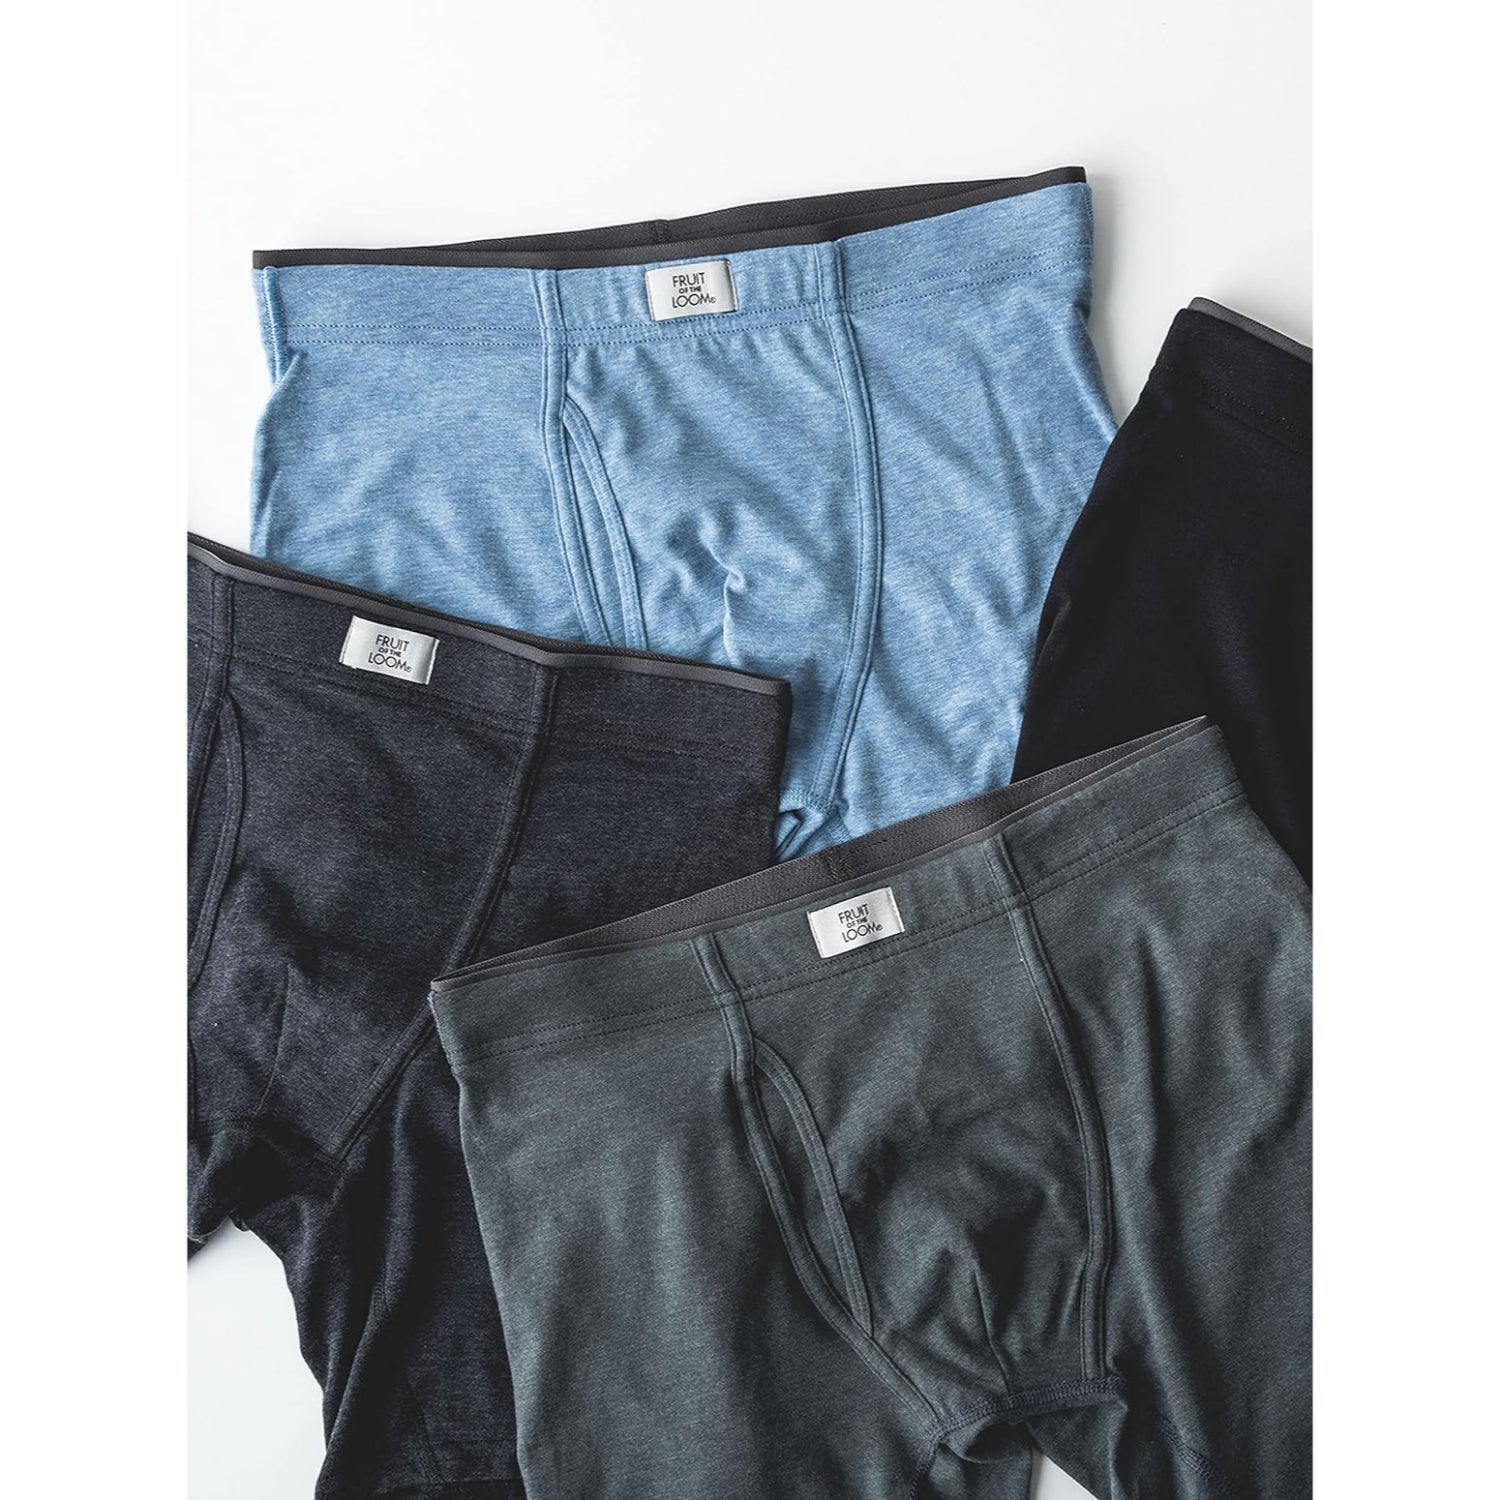 Fruit of the Loom Men's Crafted Comfort Boxer Briefs, Assorted Solids,  3X-Large : : Clothing, Shoes & Accessories